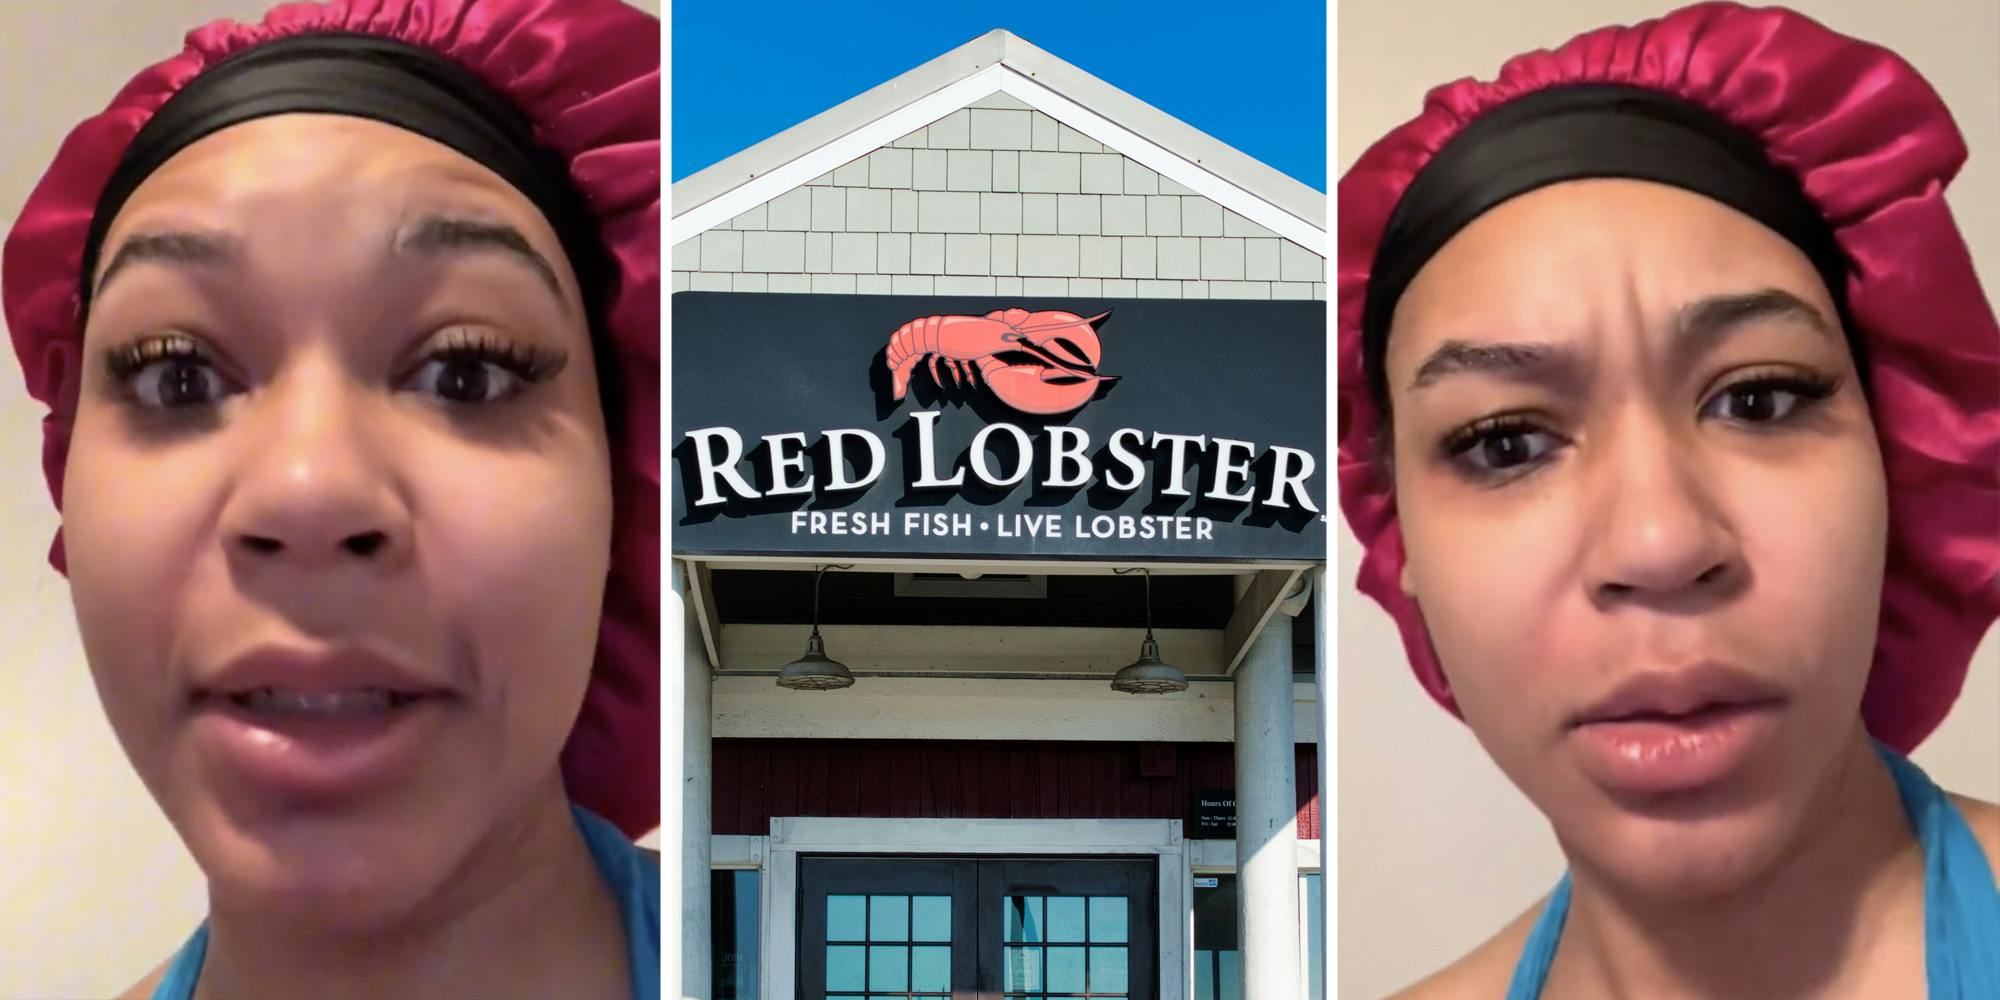 ‘NOOOOOOOOOOO THEY GOT RED LOBSTER’: Red Lobster server works her last shift without even realizing it, issues warning to other employees